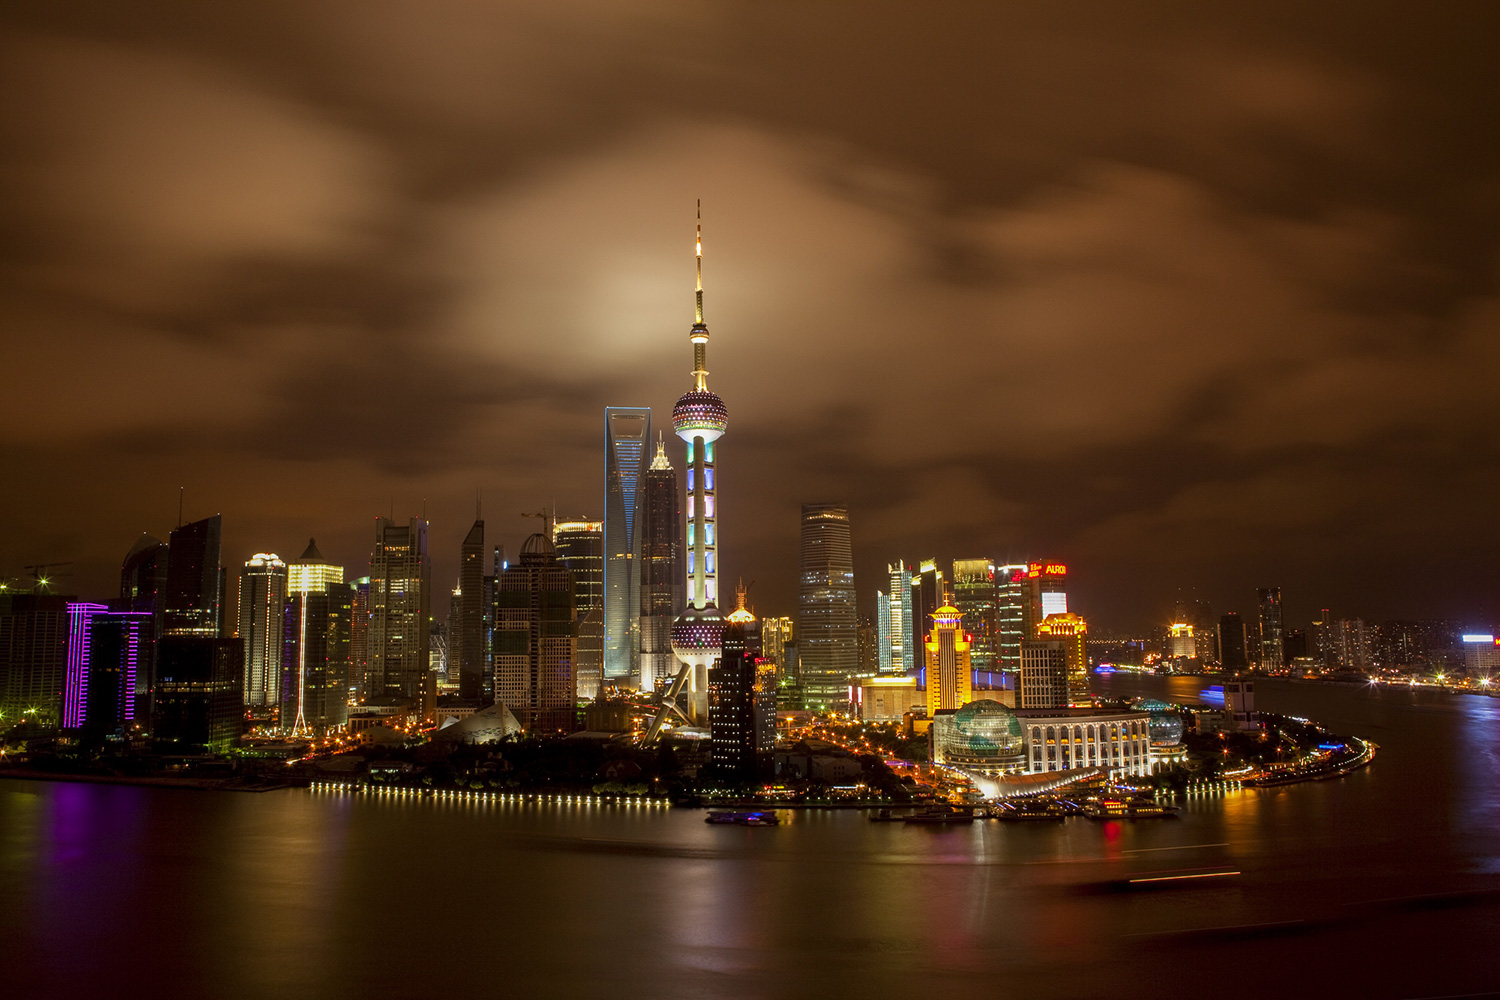 Images of Shanghai’s Pudong New Area skyline have been used often in both Chinese and western media as a symbol to illustrate stories about China’s economy, projecting an image of modern China. After Pudong was established as a special economic zone in 1993, construction sky-rocketed. Here it is 17 years later on a night in 2010.